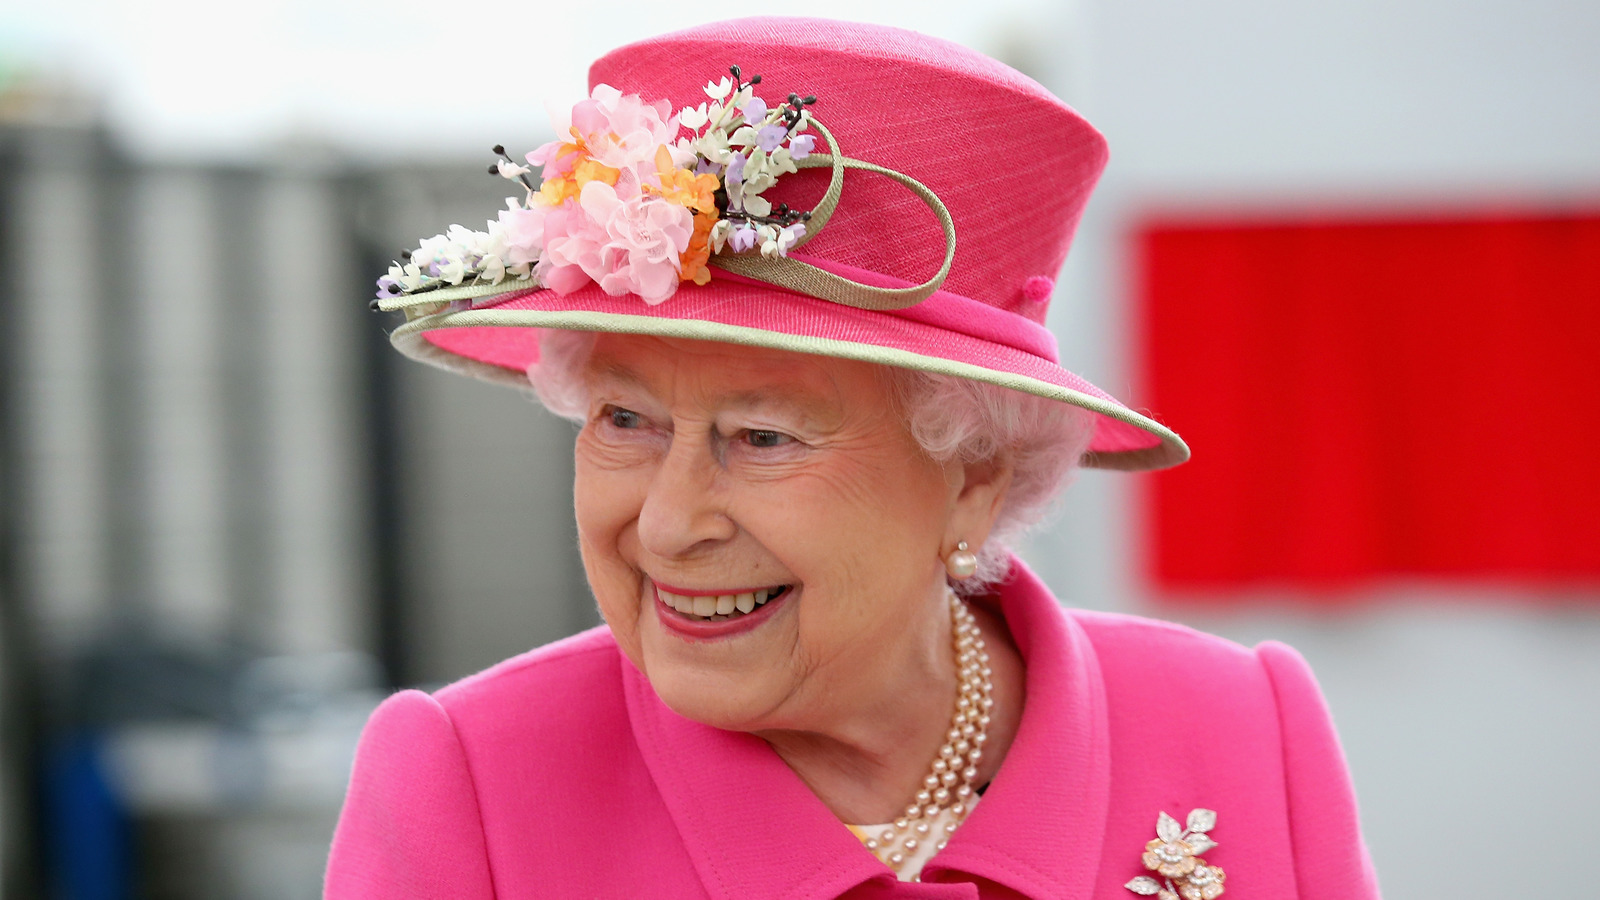 THE LIFE LESSONS WE'VE LEARNT FROM THE QUEEN